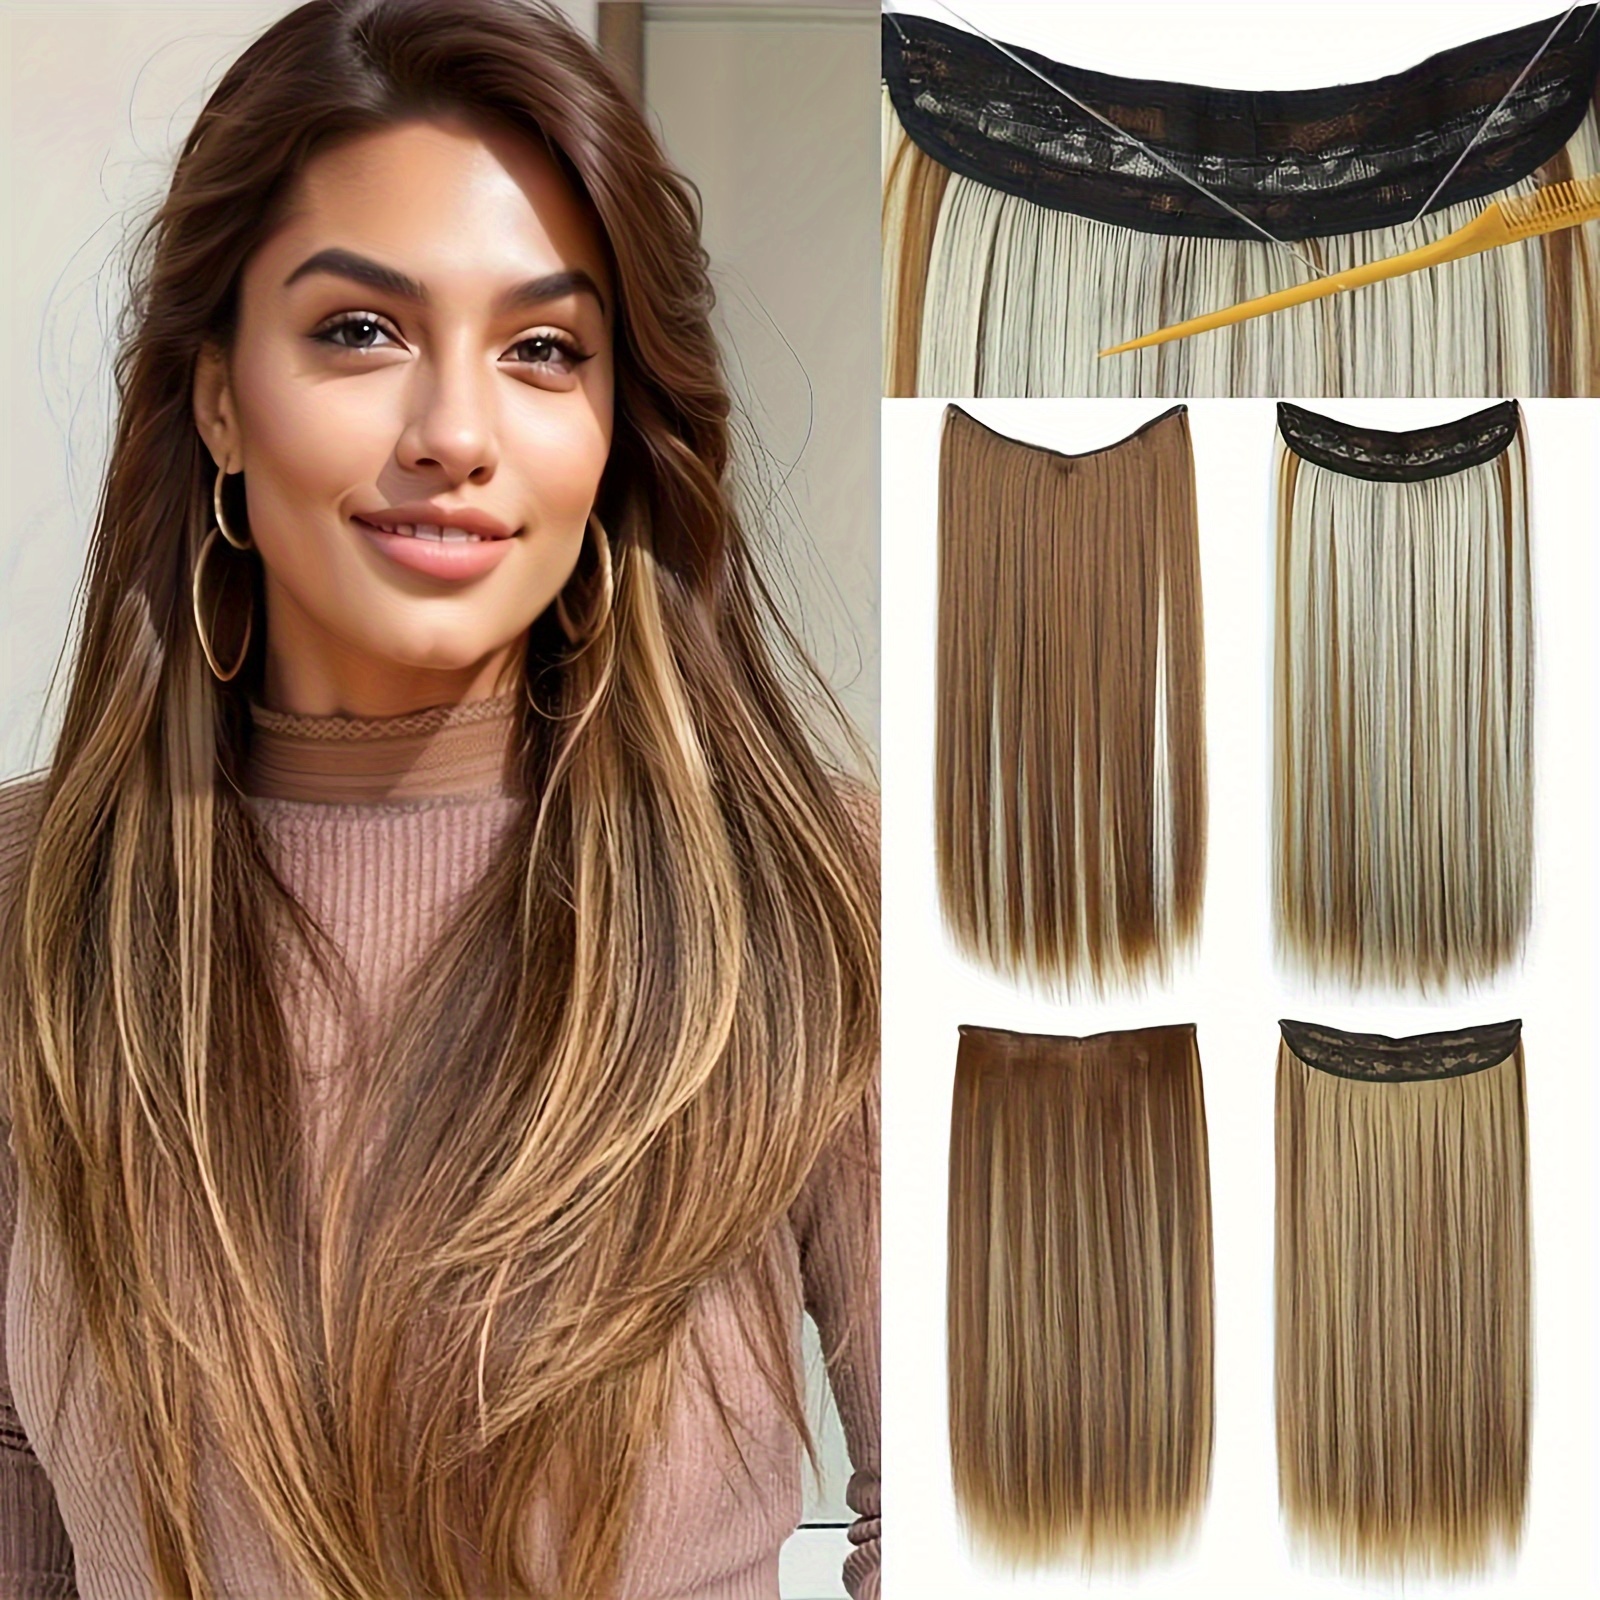 SHCKE Secret Hair Extensions 20 Inch Invisible Dirty Blonde Hair Extension  Hidden Curly Hair Extensions with Transparent Wire Removable Secure Clips